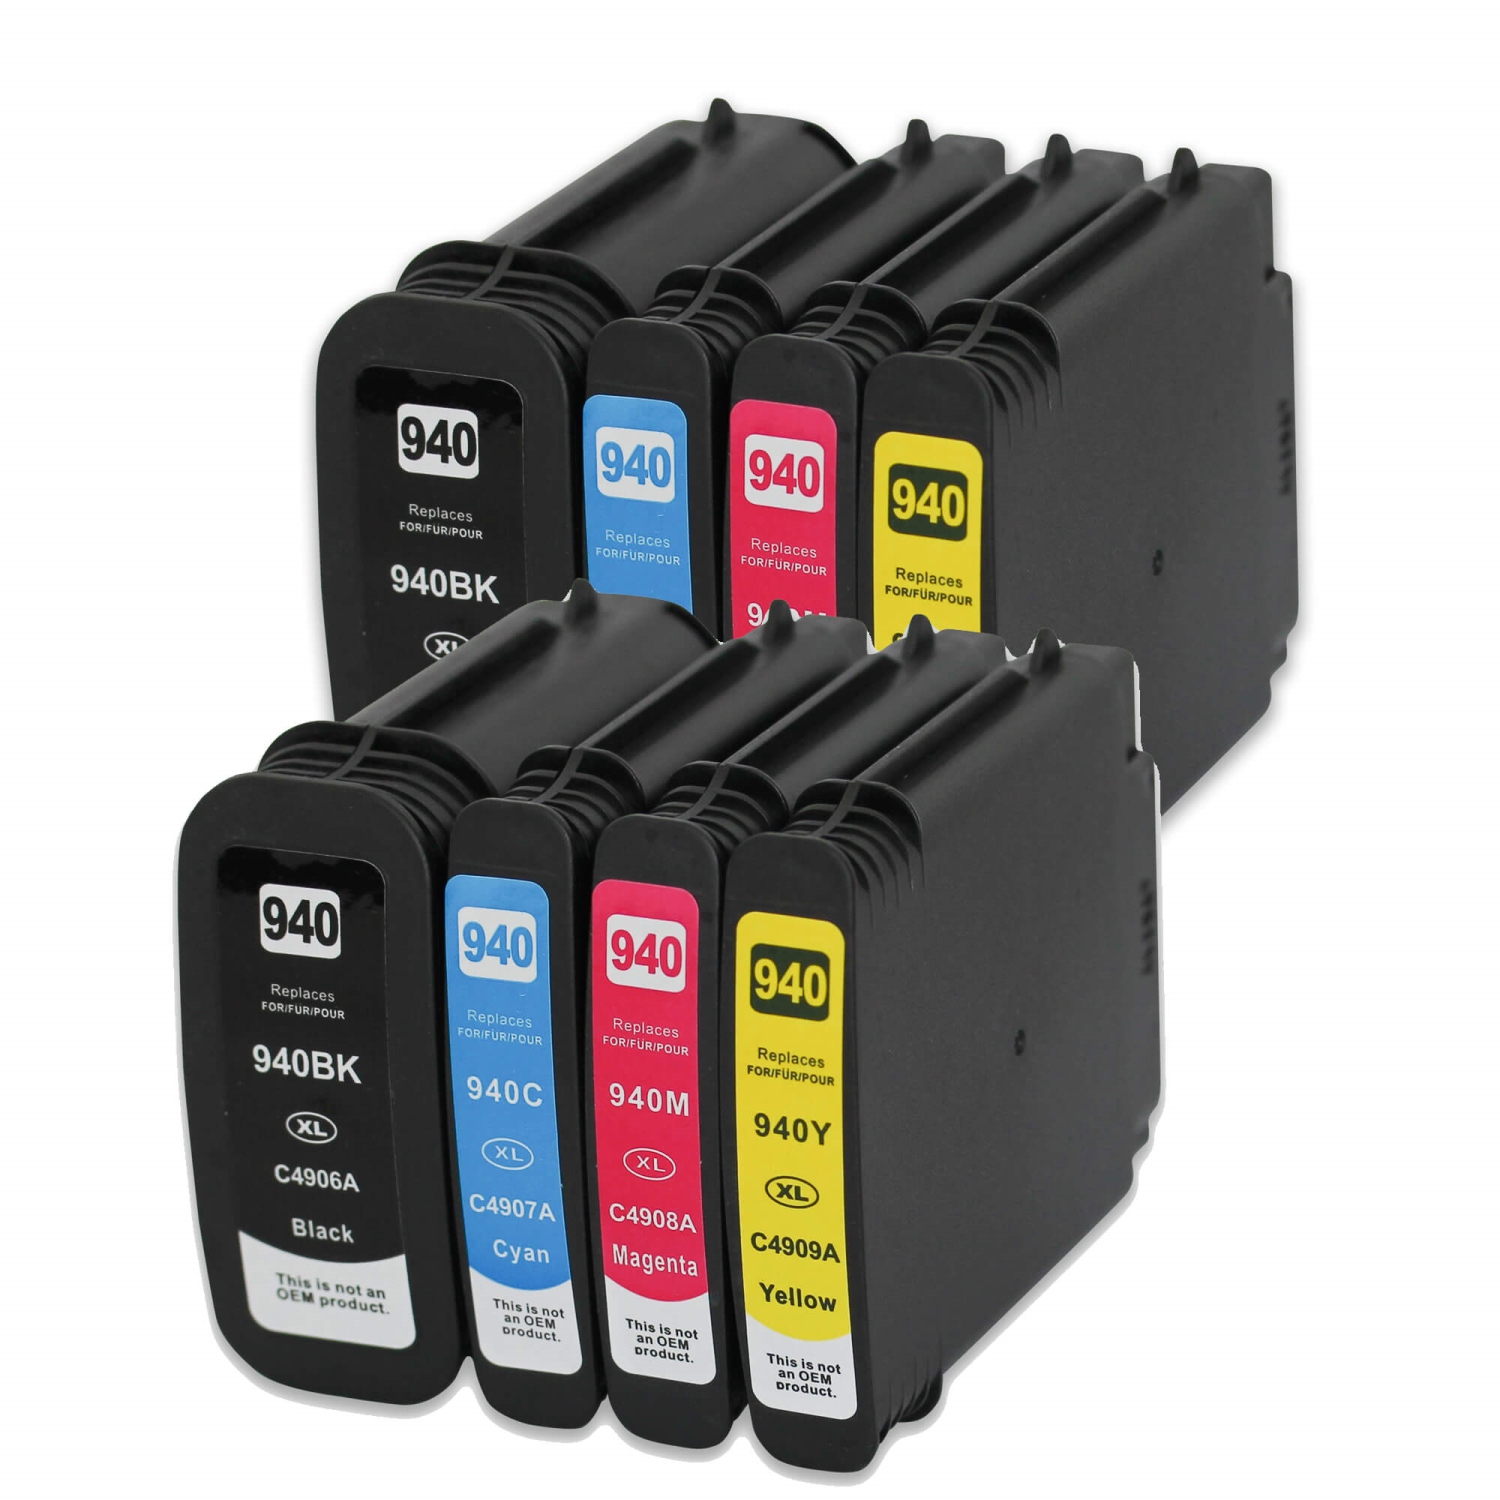 Max Saving -8 PK (2Set) Compatible with 940XL INK CARTRIDGE for HP 940XL, HP940 Ink OFFICEJET PRO 8000 8500 8500A HP940